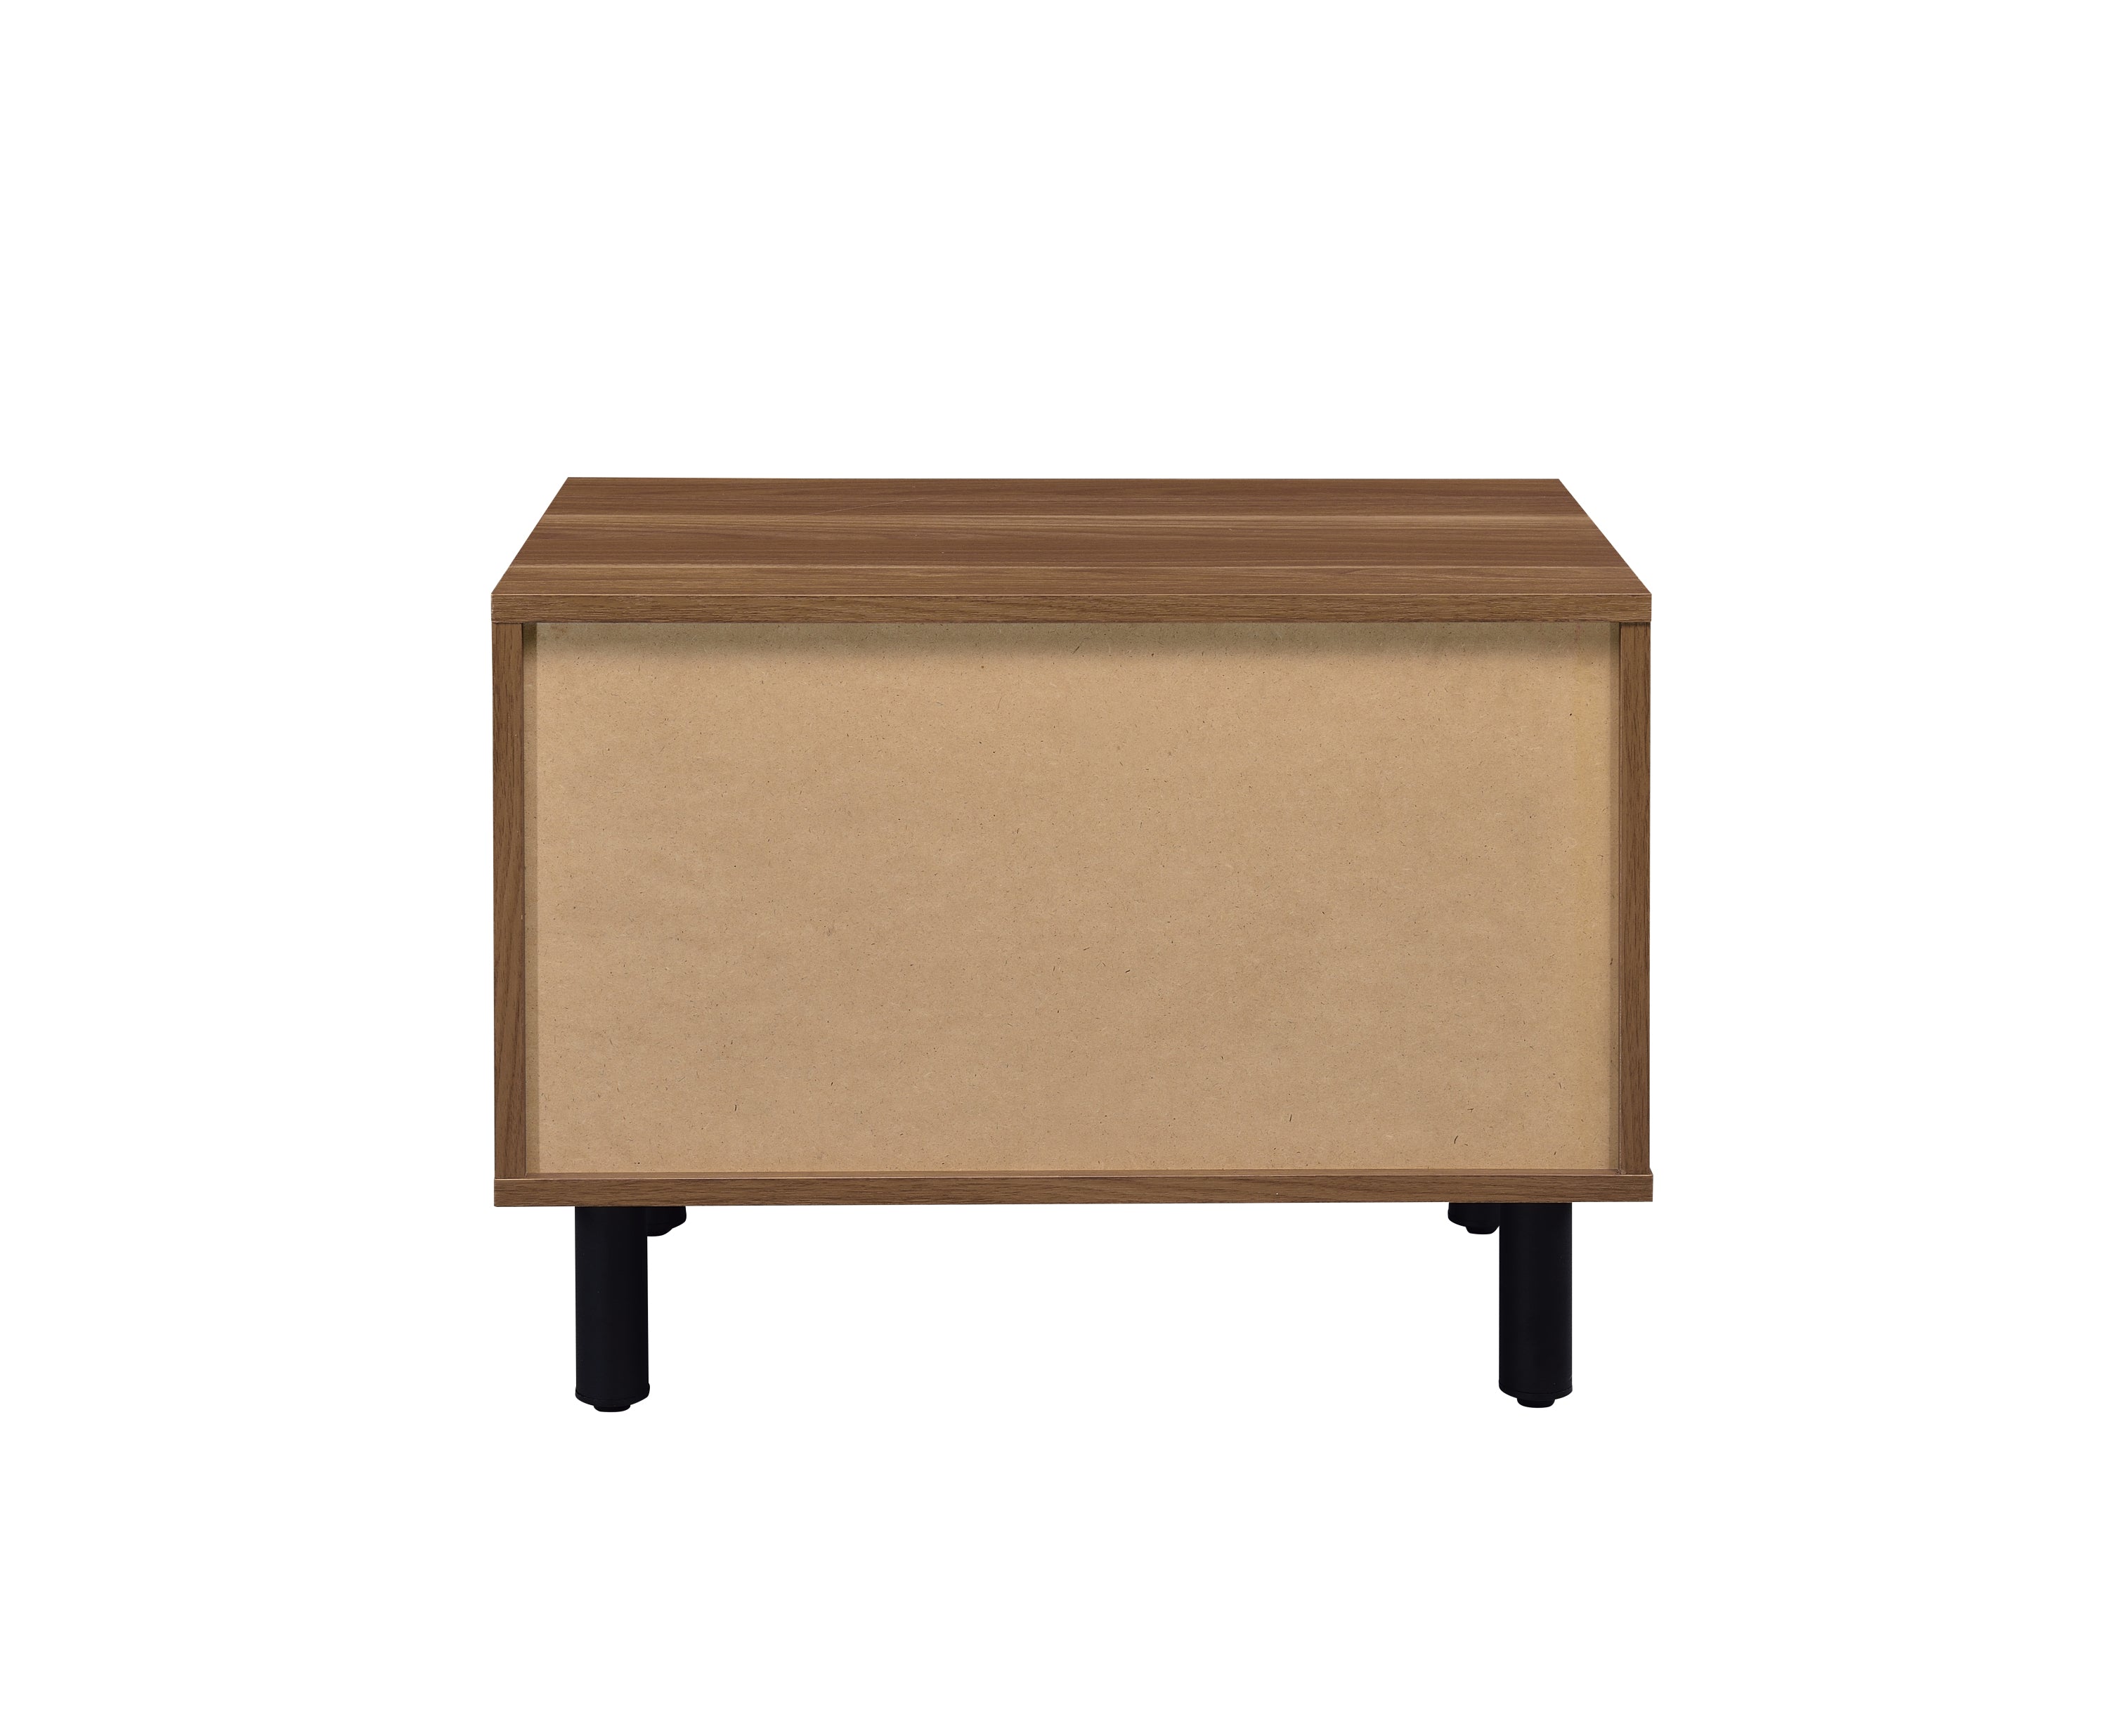 Modern Accent Table - Brown Oak & Black Finish